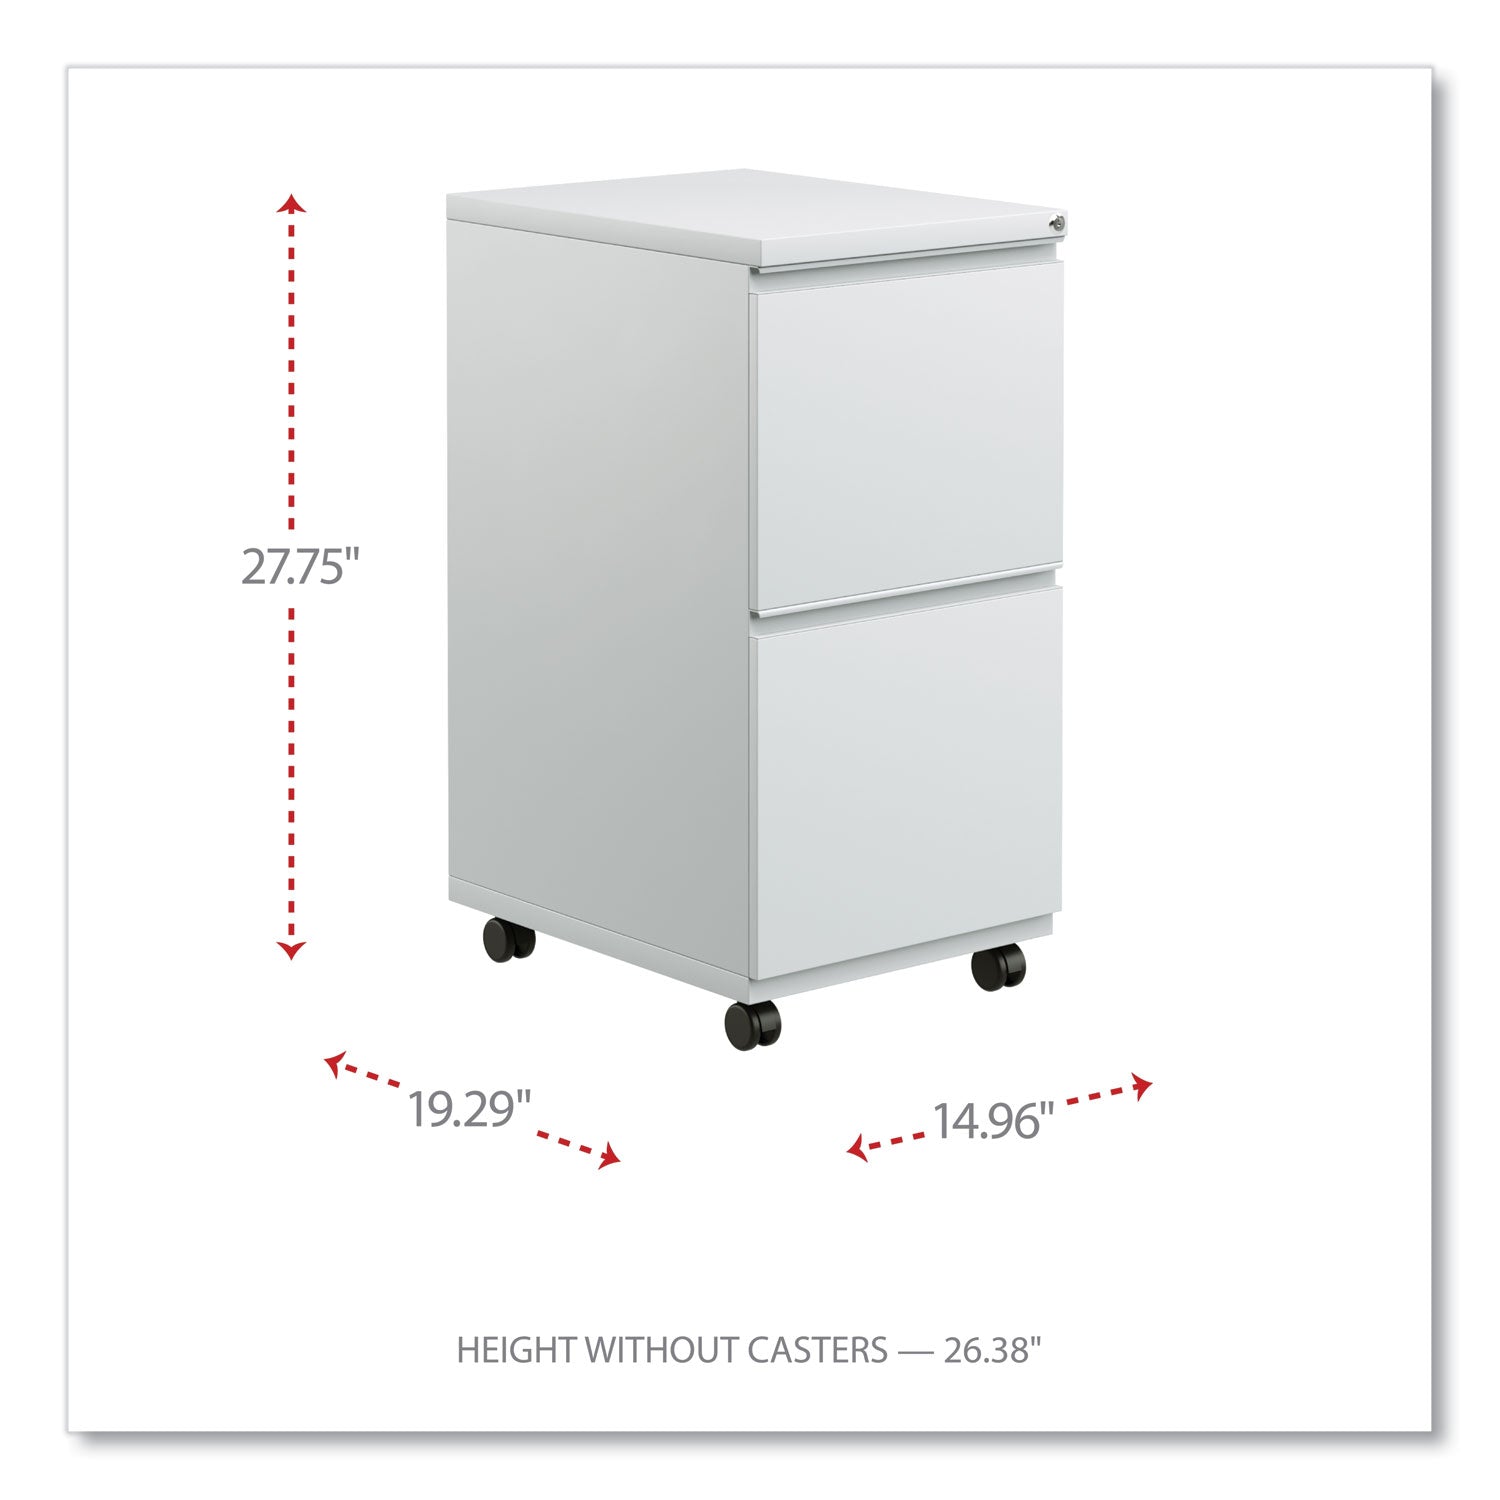 file-pedestal-with-full-length-pull-left-or-right-2-legal-letter-size-file-drawers-light-gray-1496-x-1929-x-2775_alepbfflg - 2